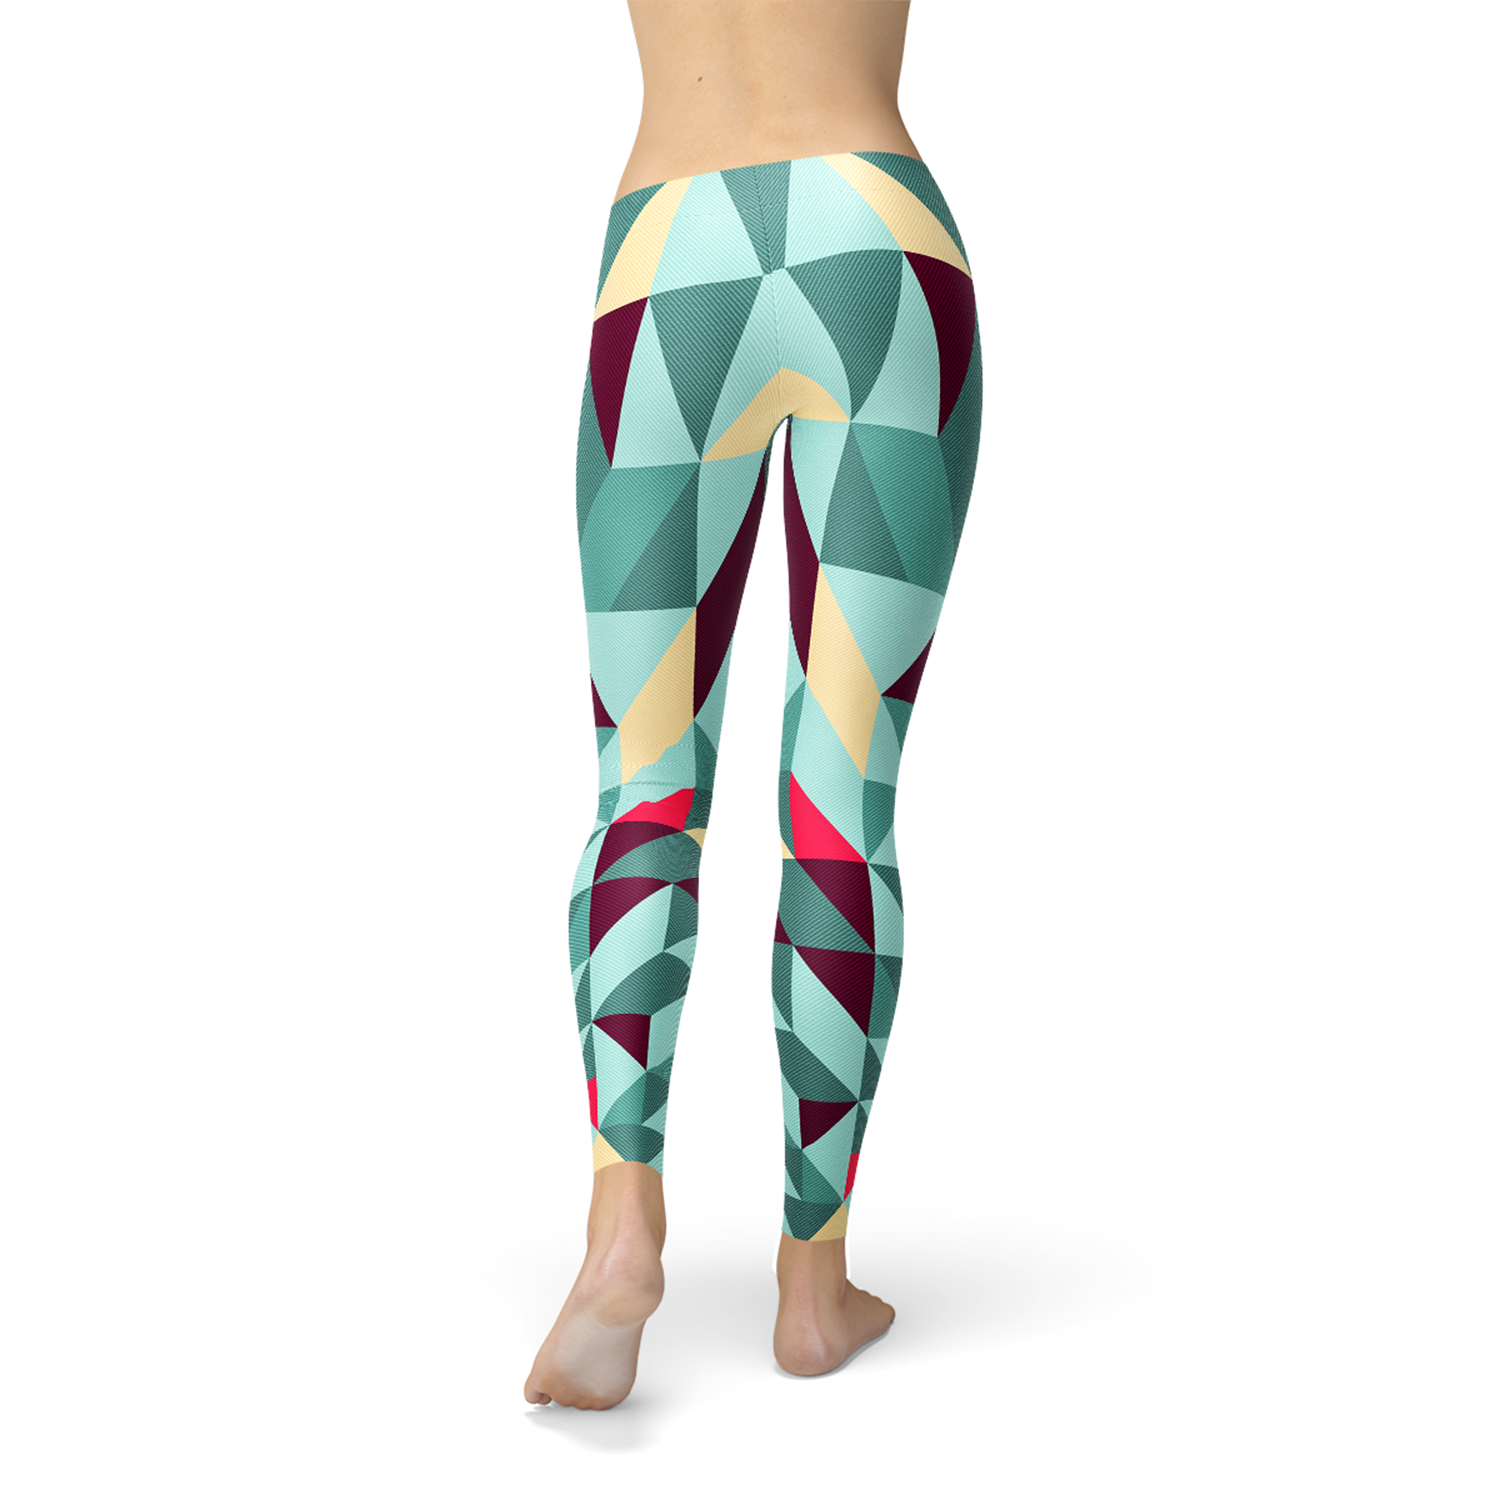 Geometric Everyday – By w/ Clothing Leggings - Womens Me & Found Triangles Accessories Colorful